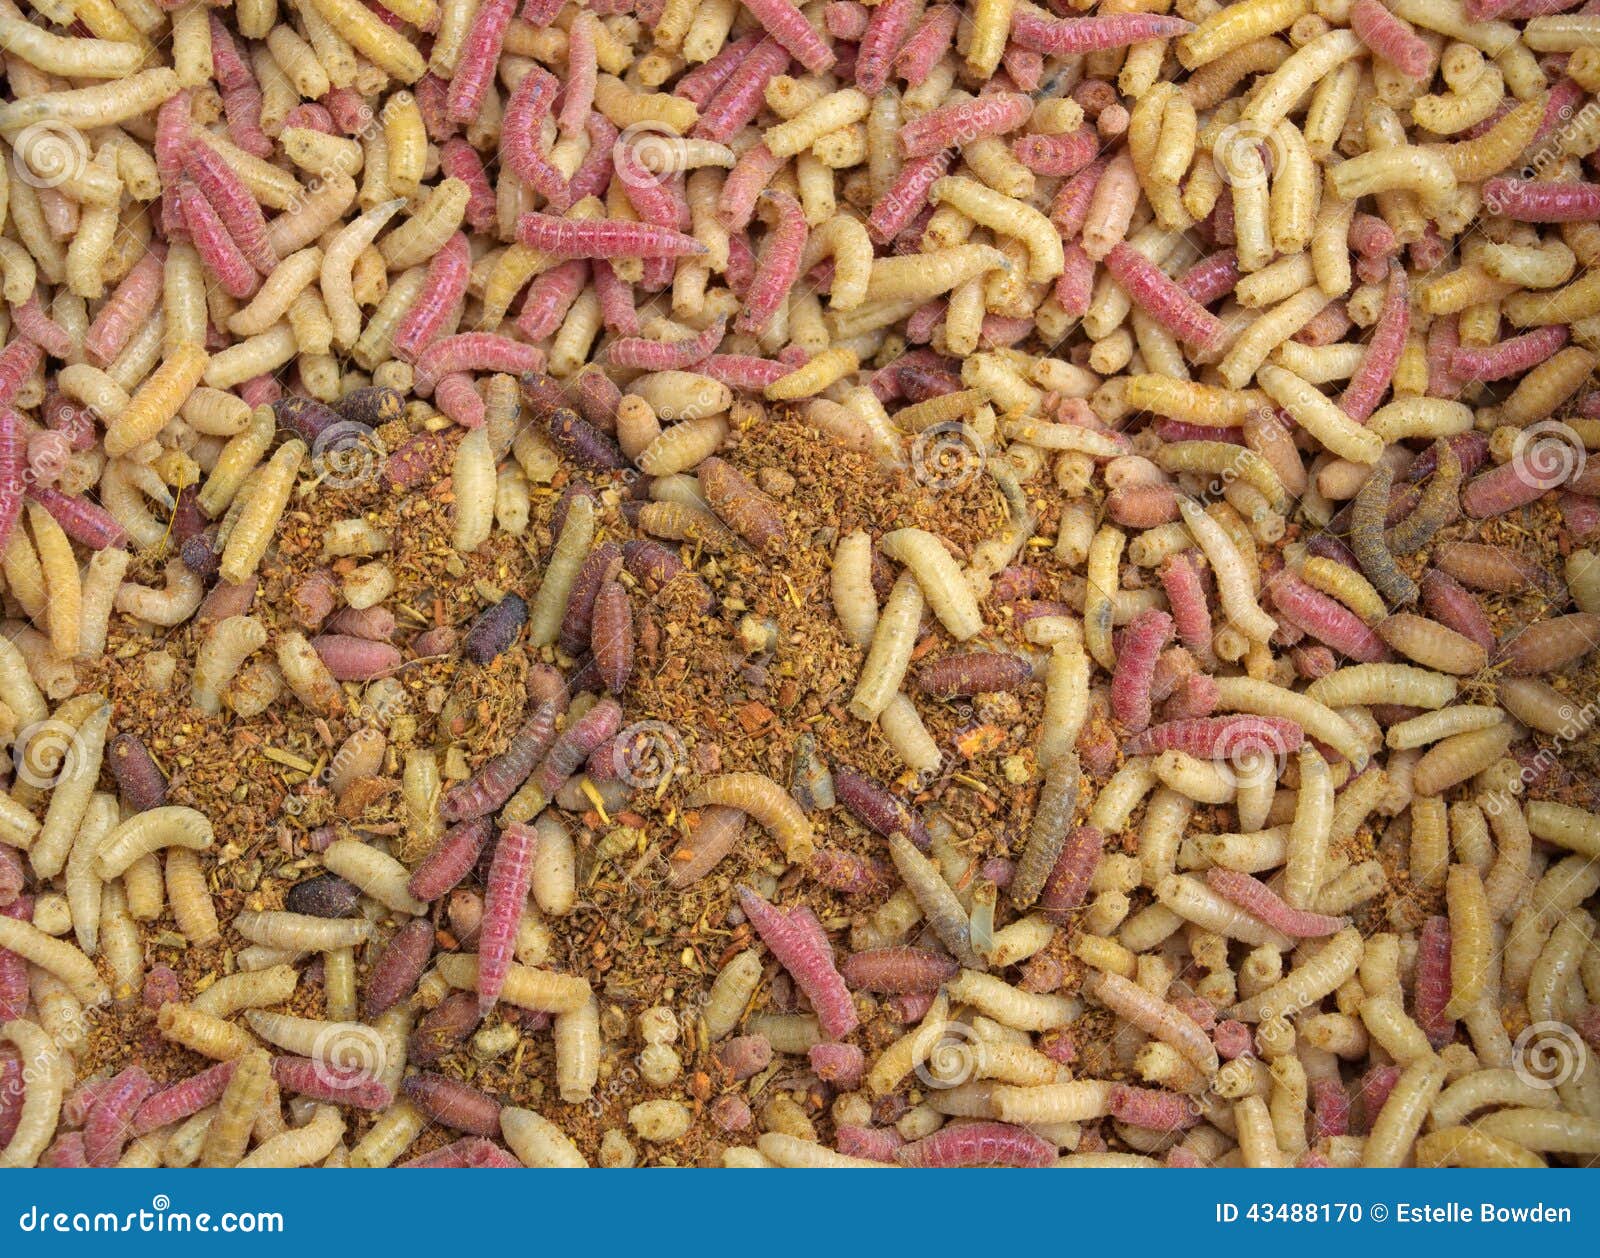 Live Bait Maggots for Fishing Stock Photo - Image of insects